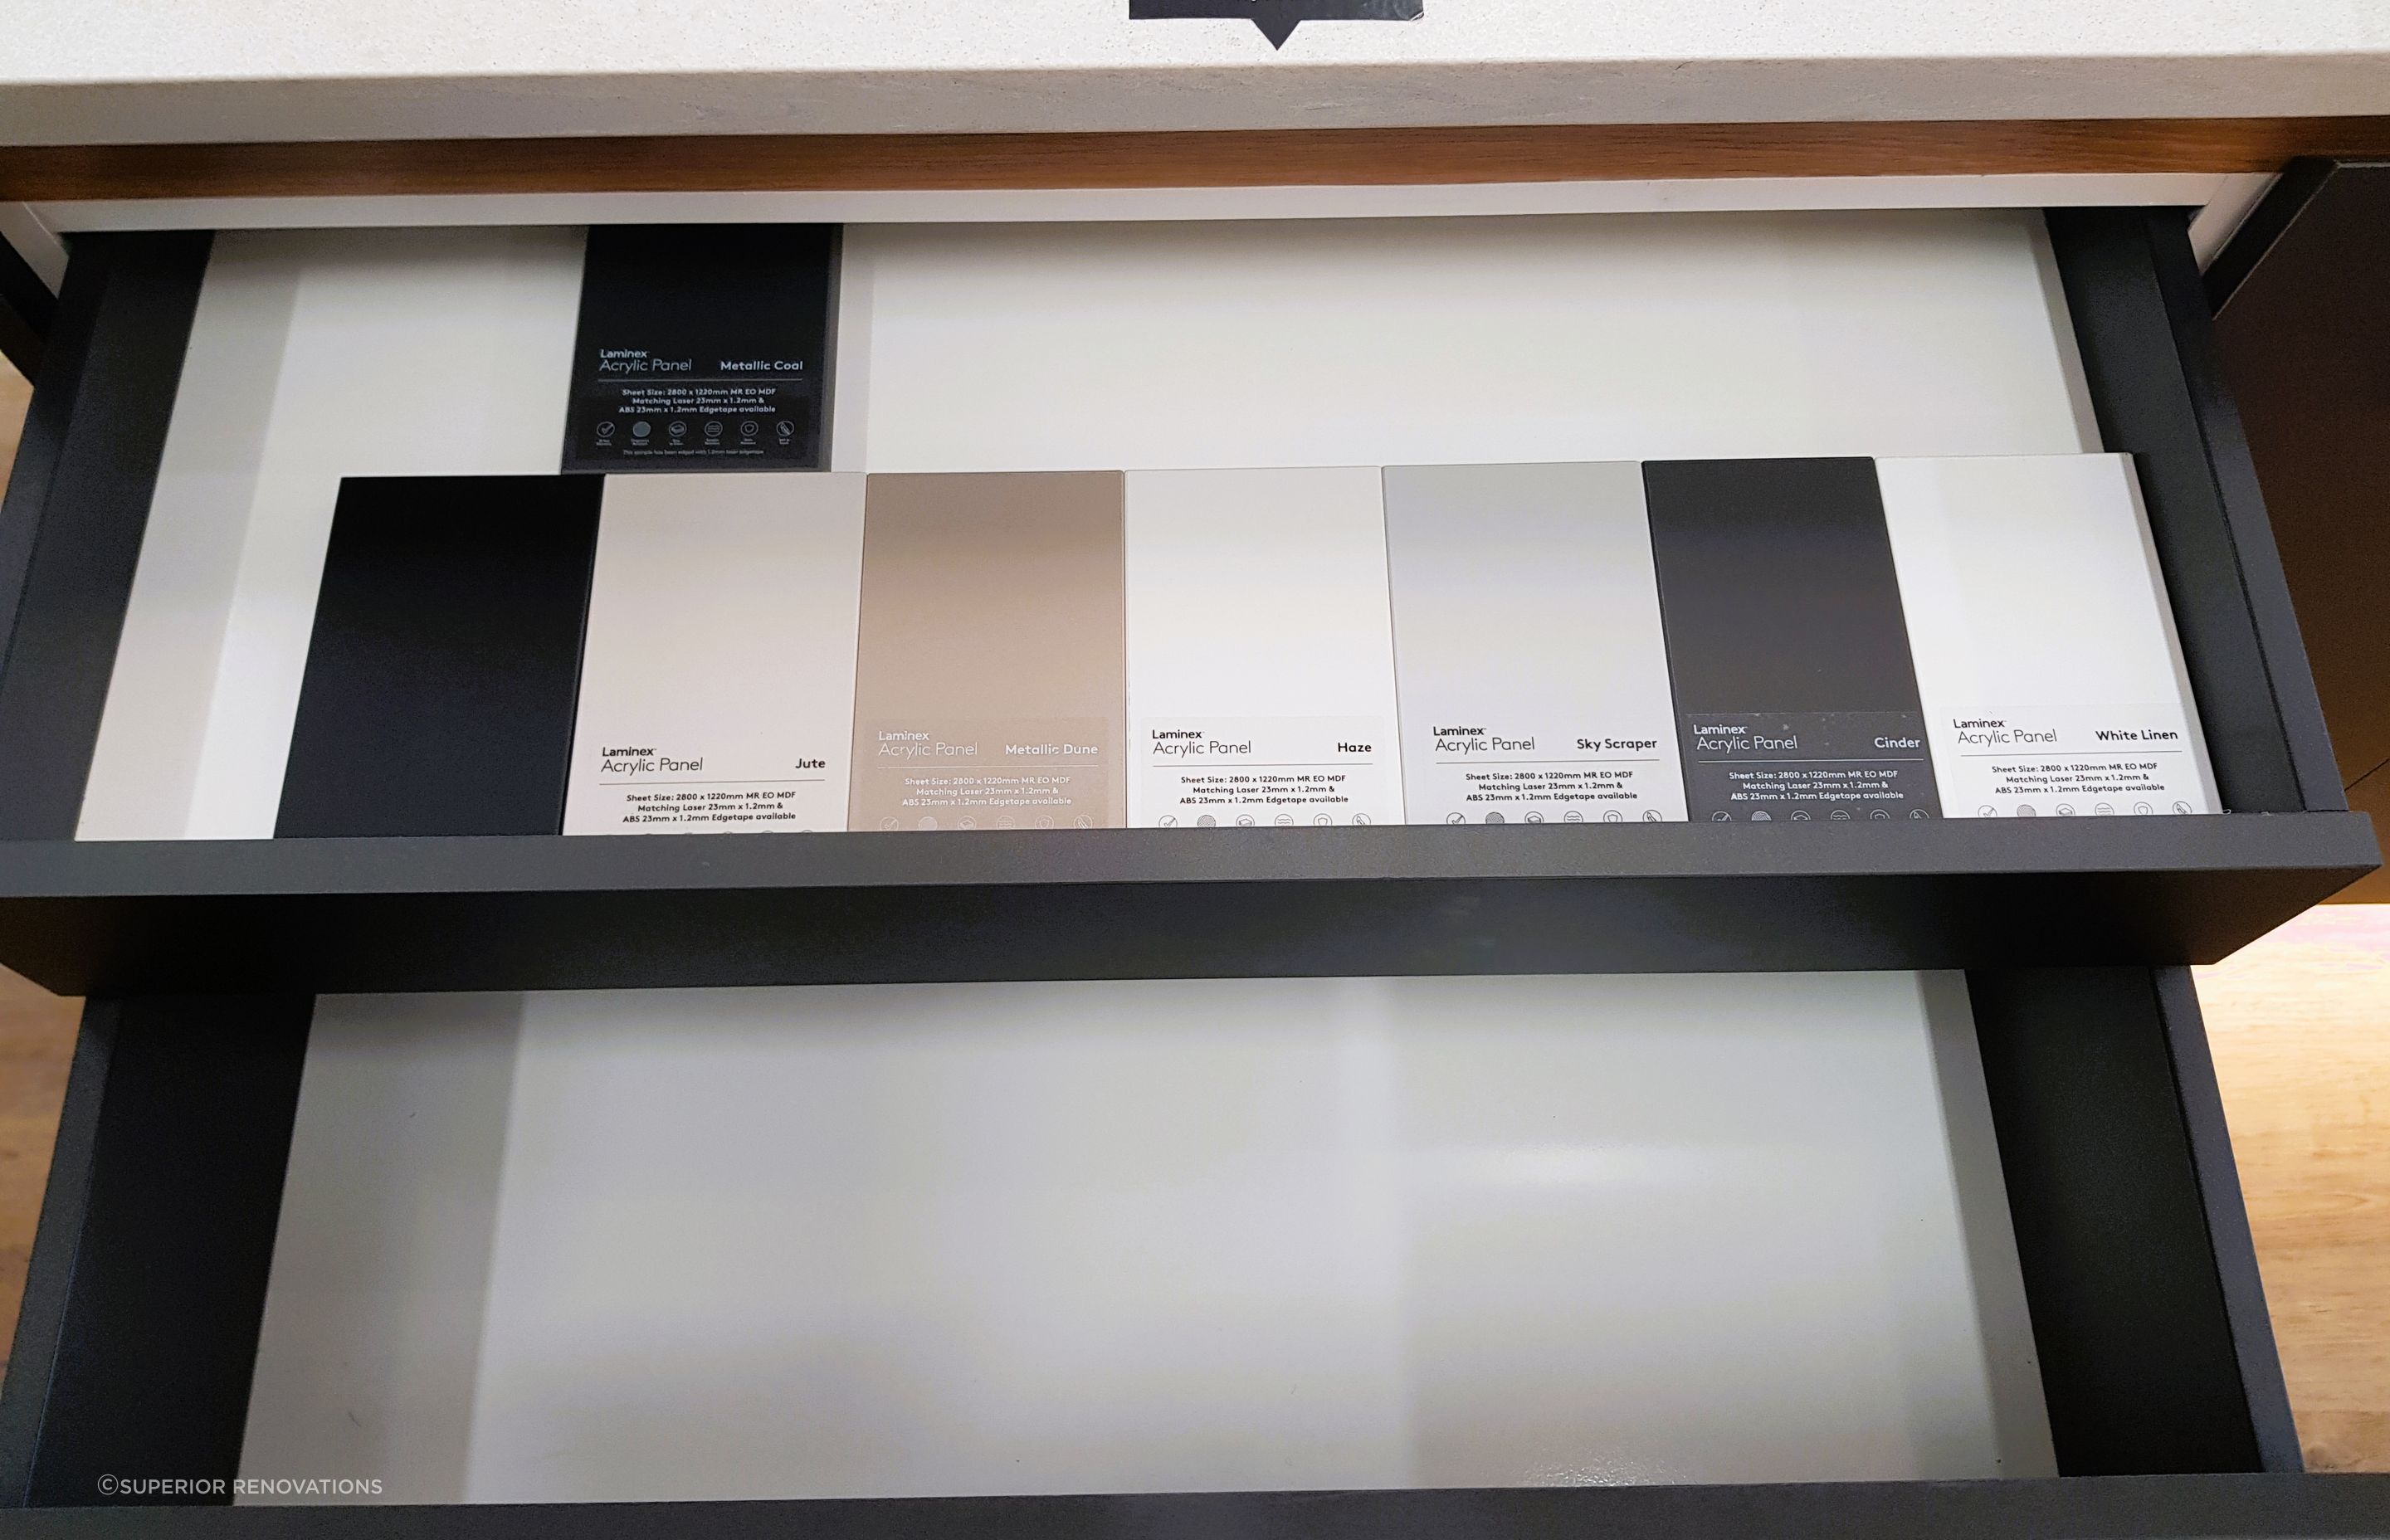 When you open one of our hidden drawers, you will see all the other colours that you can use to customise your kitchen in the style that you would like.